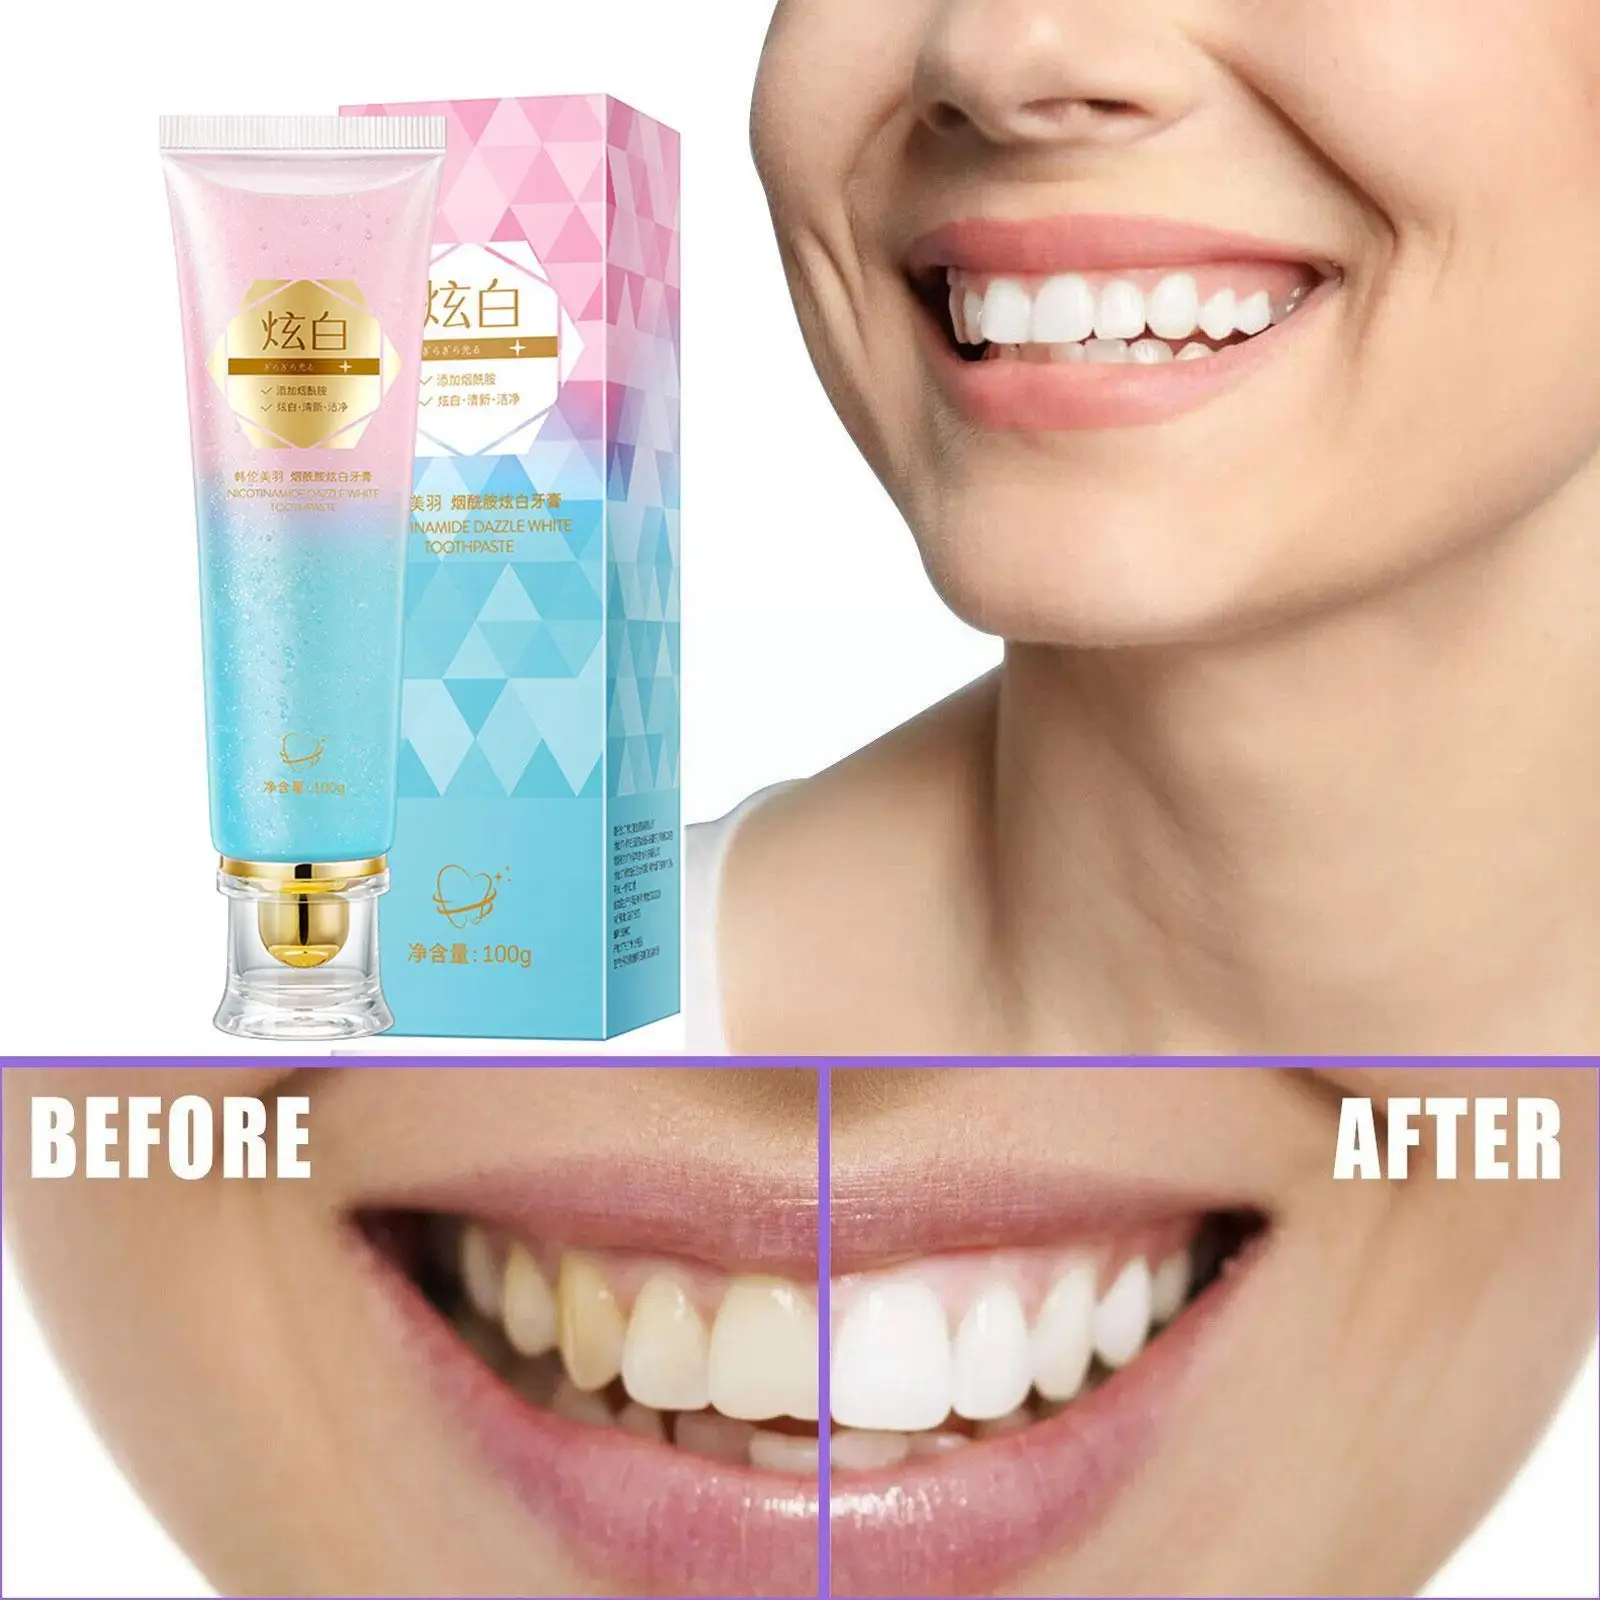 

100g Dazzling White Toothpaste Fresh Breath Niacinamide Bad Toothpaste Care Remove Tooth Tone Teeth Remove Stains To To Bre E8B8